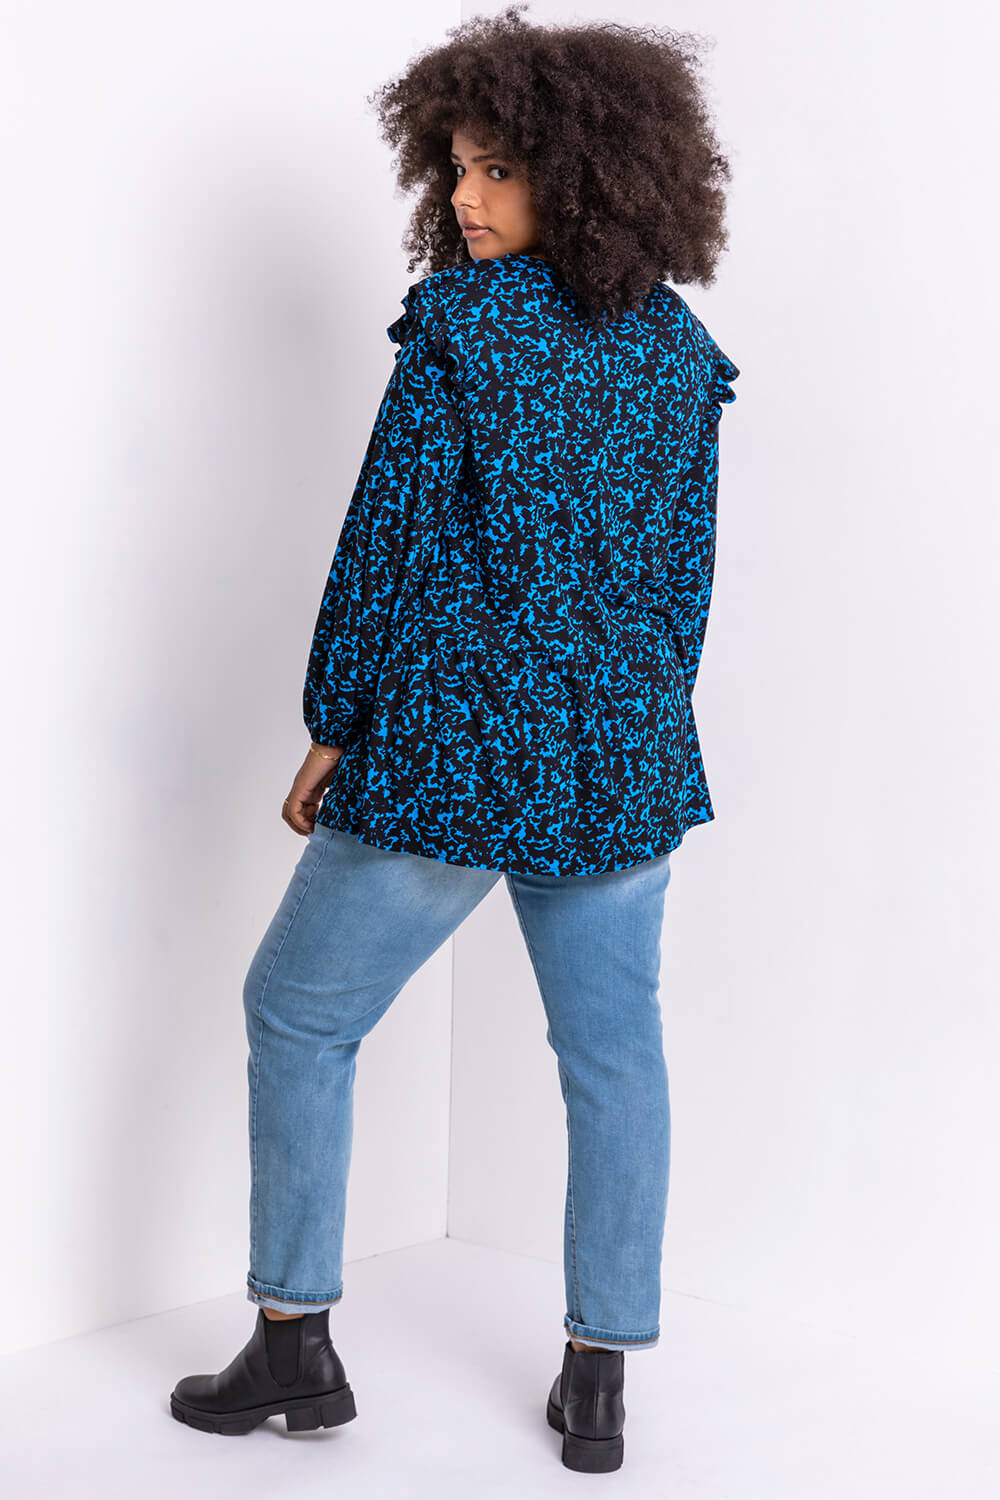 Curve Abstract Animal Frill Detail Tunic in Royal Blue - Roman Originals UK